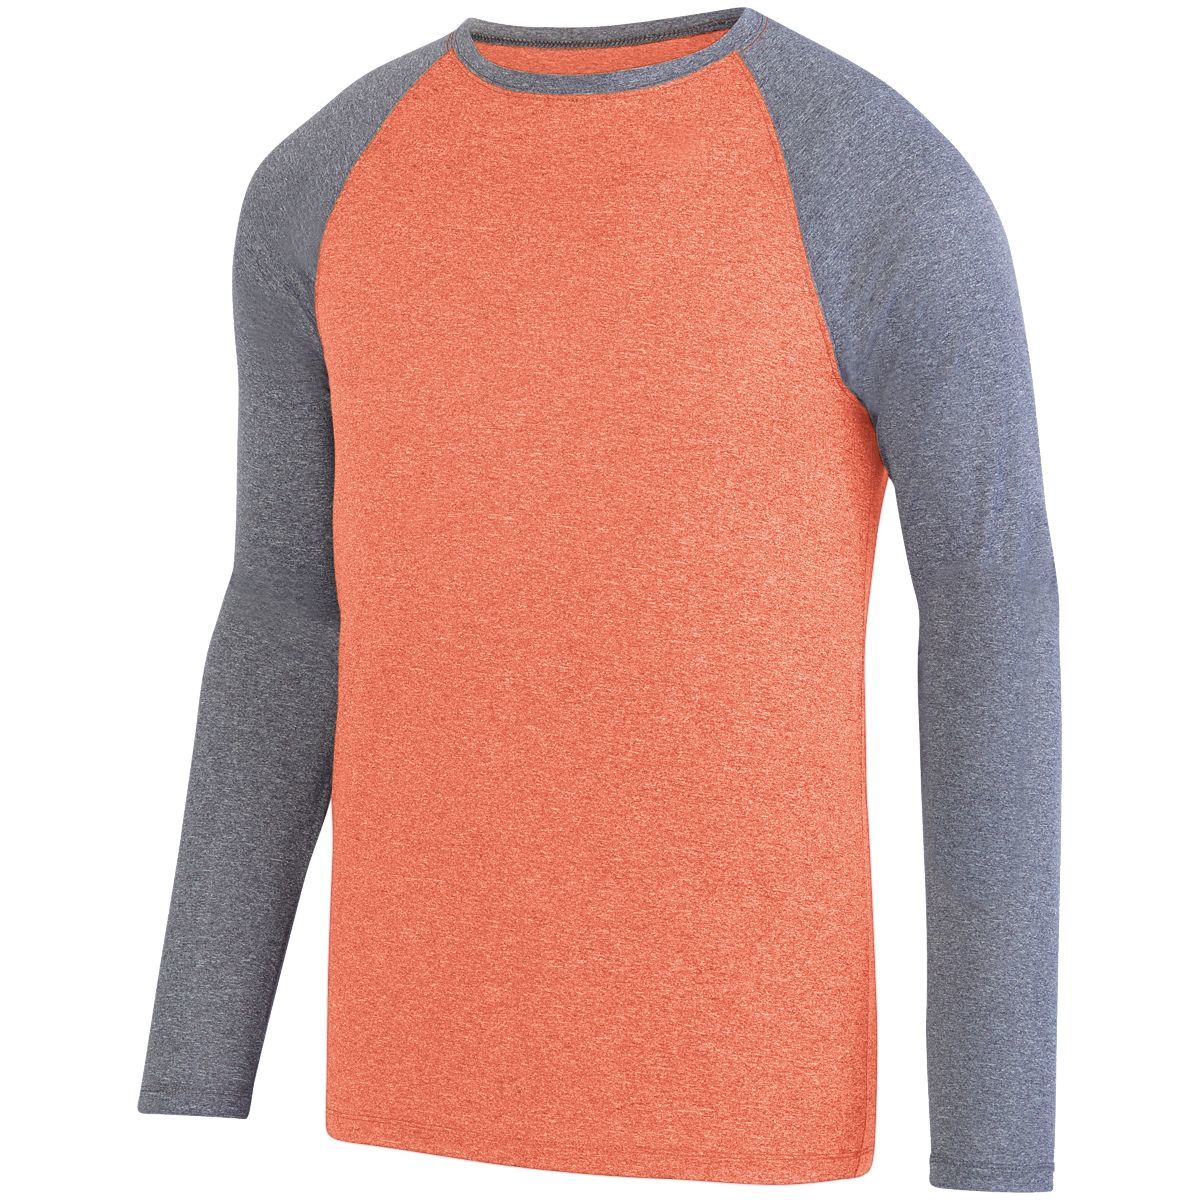 Augusta Sportswear Kinergy Two Color Long Sleeve Raglan Tee in Orange Heather/Graphite Heather  -Part of the Adult, Adult-Tee-Shirt, T-Shirts, Augusta-Products, Shirts product lines at KanaleyCreations.com